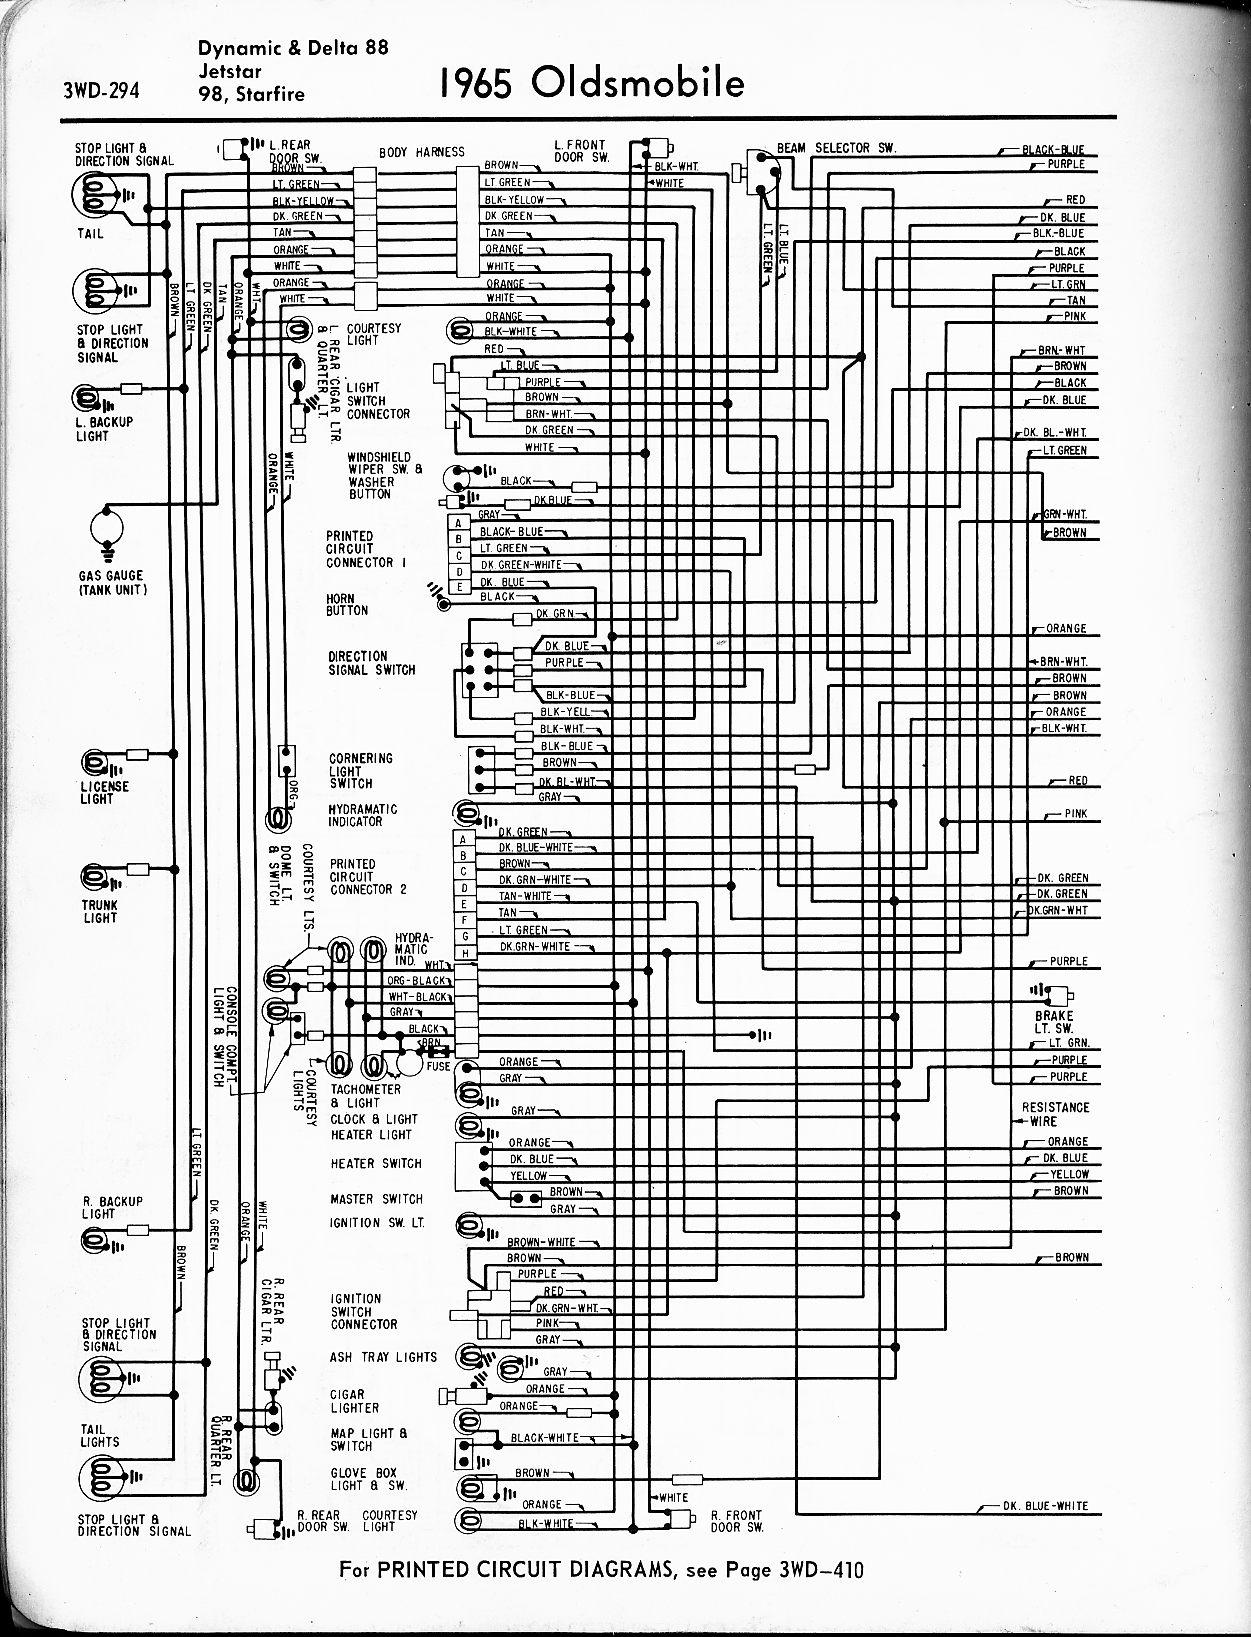 Heater Wiring Diagram For 98 Oldsmobile | Wiring Library 88 moto 4 wiring diagram 